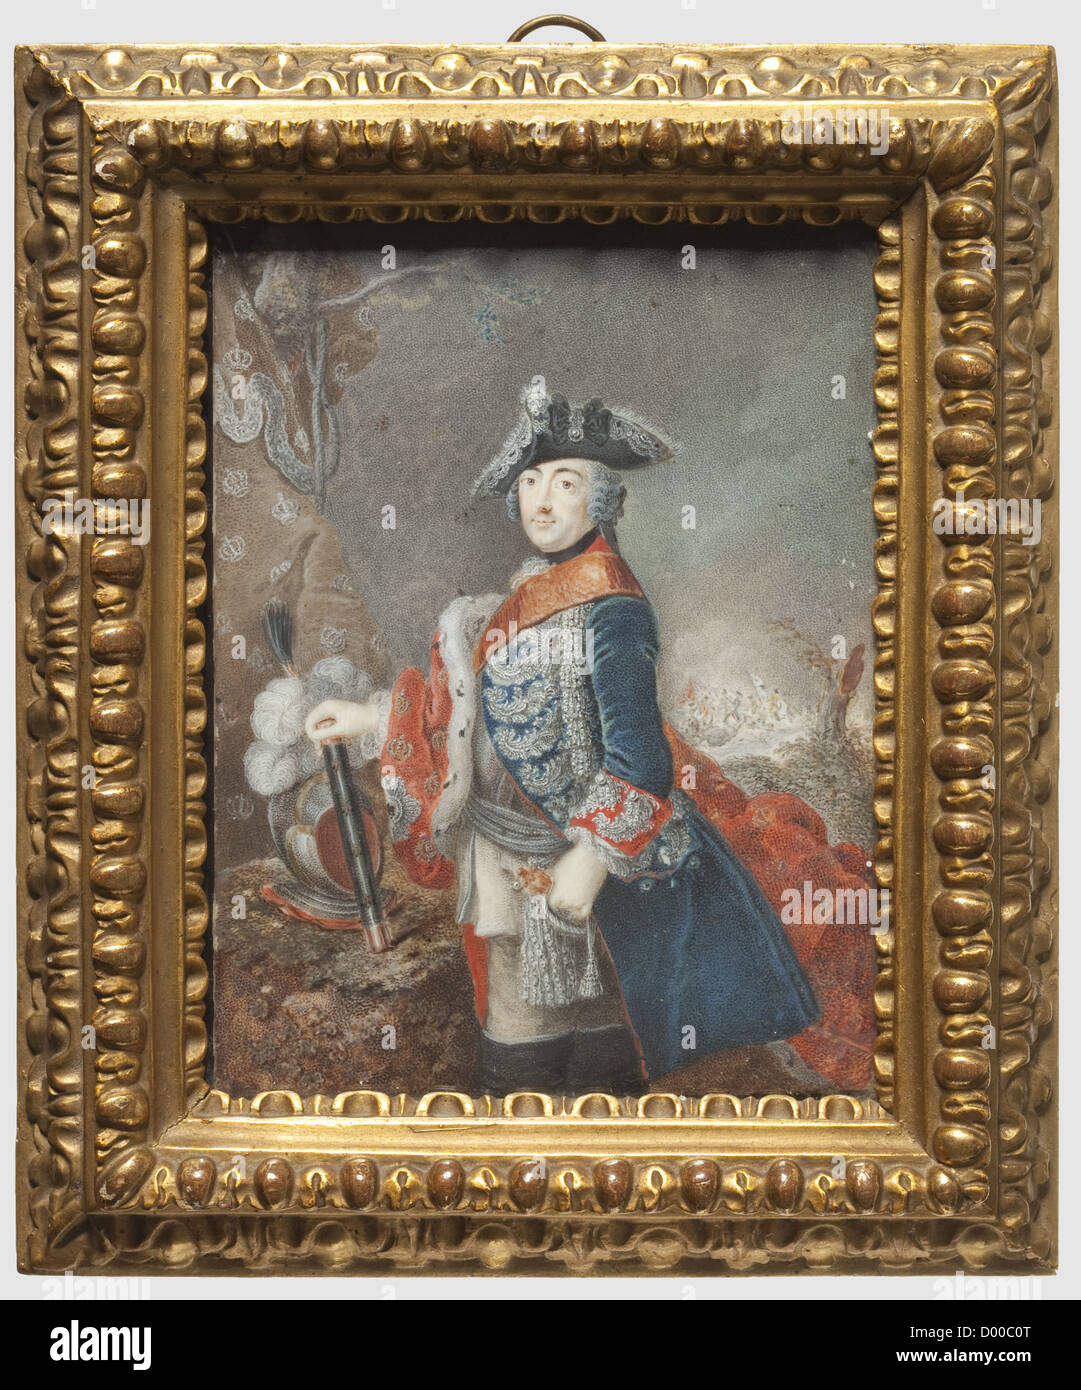 Friederich II, the Great, a miniature portrait, Three quarter portrait of the King in the richly embroidered uniform of the I Guards Battalion with a marshal's baton. Miniature after a portrait by Pesne after 1755. Gouache on ivory, 95 x 103 mm, unsigned. The high quality and style indicate a work by the court miniaturist Anton Friedrich König (1722 - 1787). König was a student of both Pesne and Blesendorf and painted most of the surviving miniature portraits of Friedrich II, which were gifts given by the King. In an old gilt moulded frame 150 x 185 mm. High qu, Stock Photo